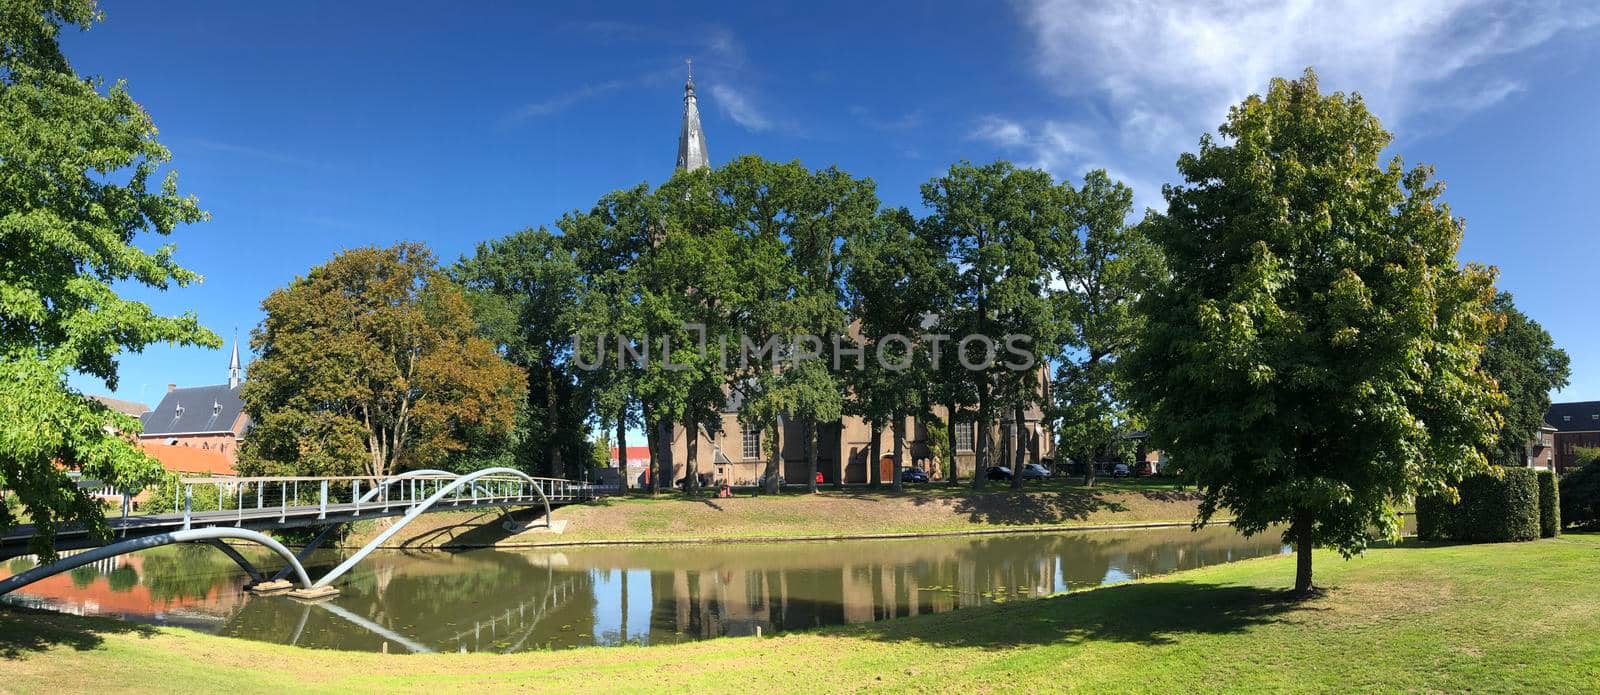 Panorama from the canal around Groenlo by traveltelly